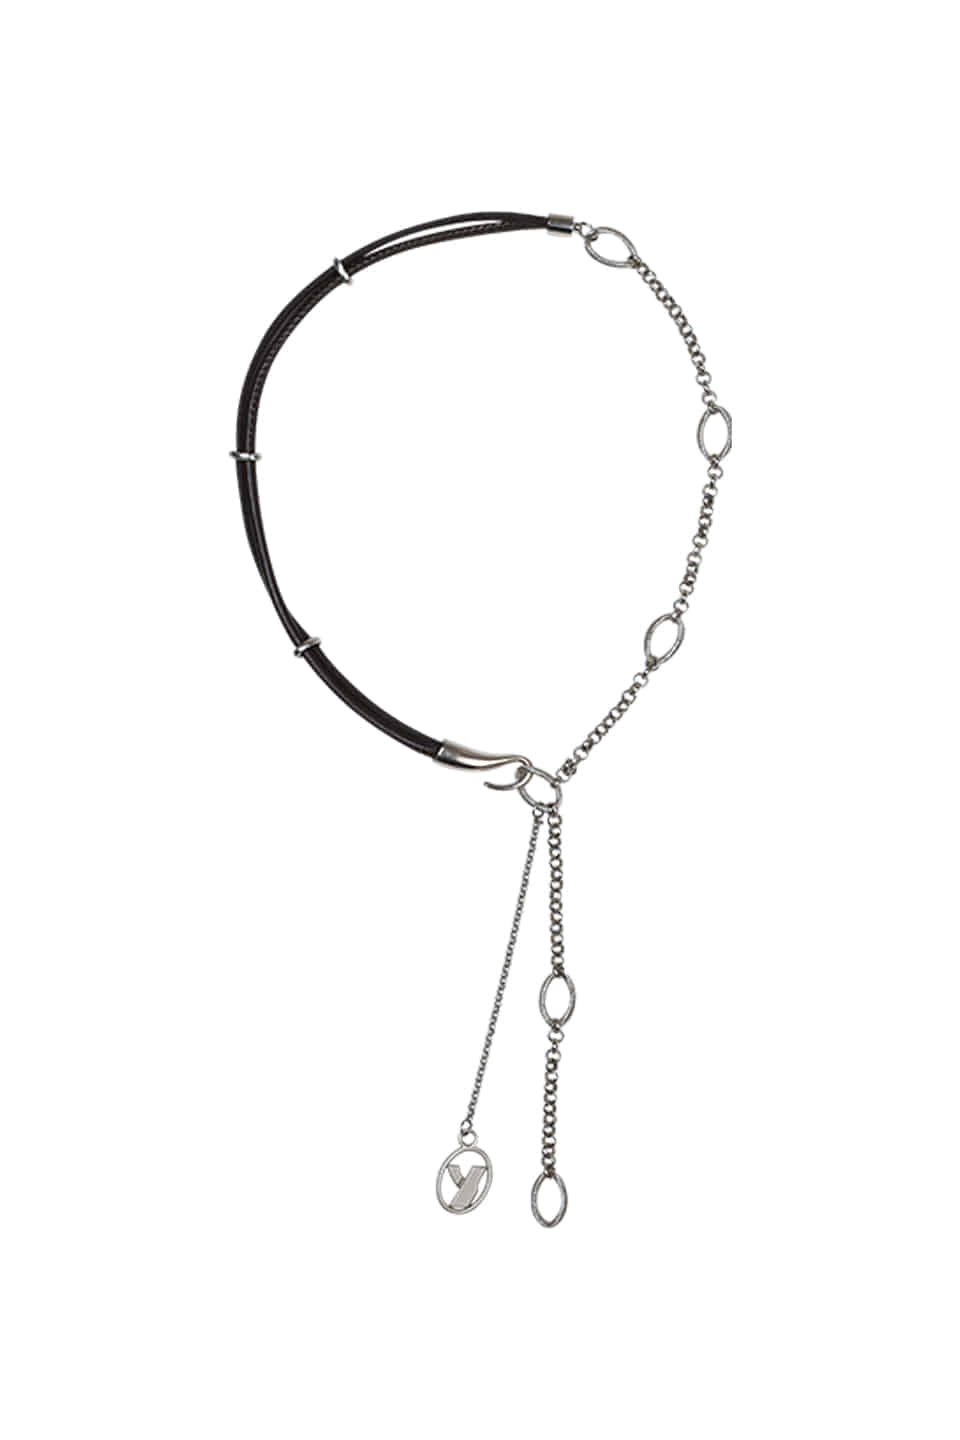 HOOK LEATHER CHAIN NECKLACE - BLACK